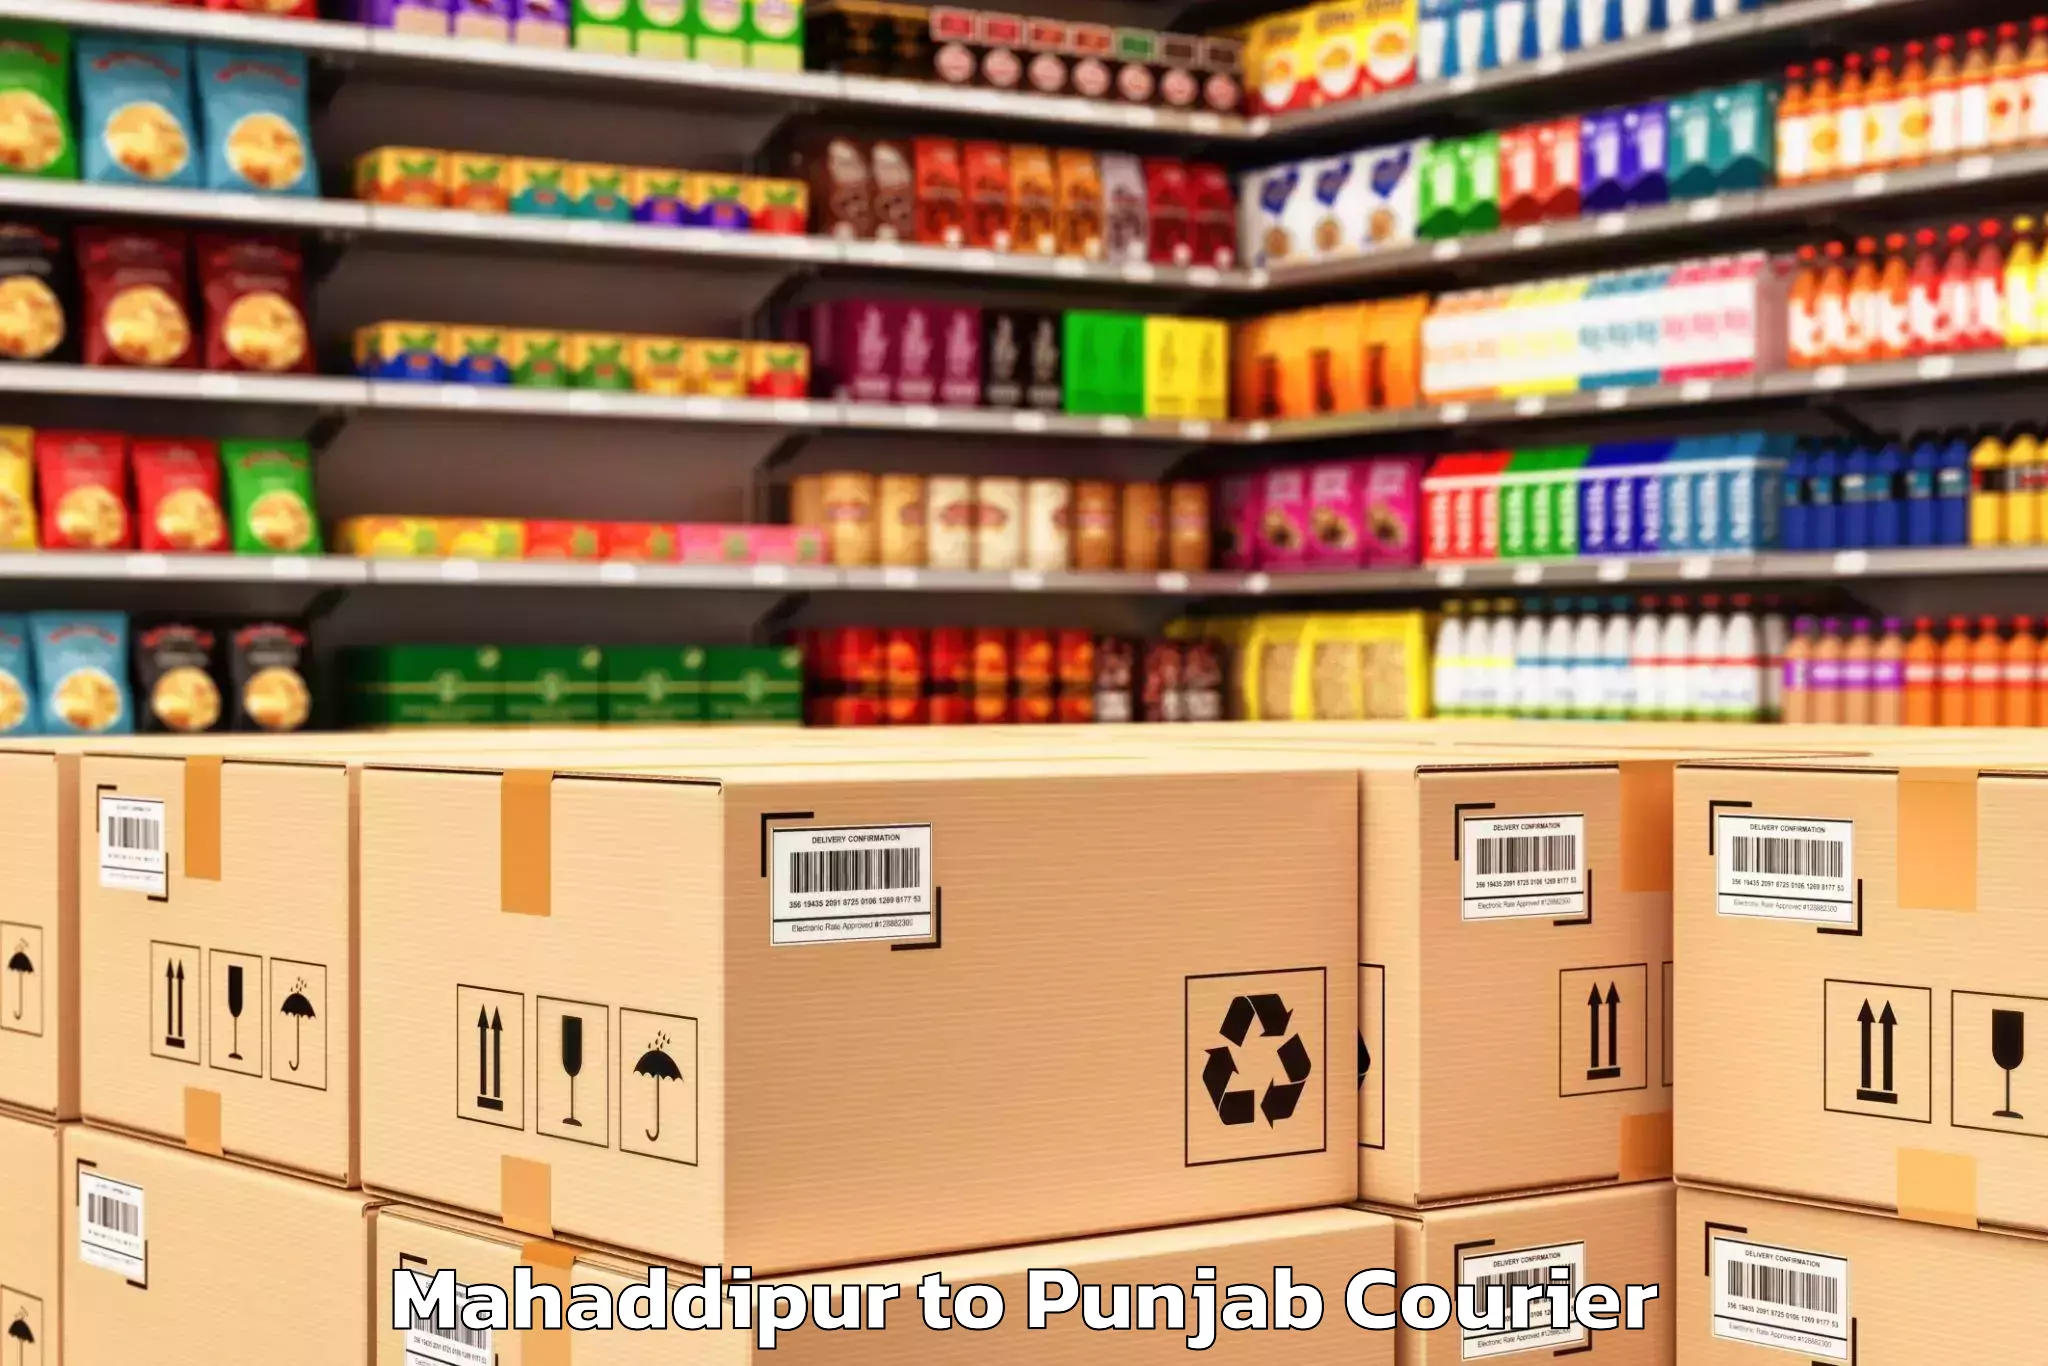 Tailored moving services Mahaddipur to Sirhind Fatehgarh